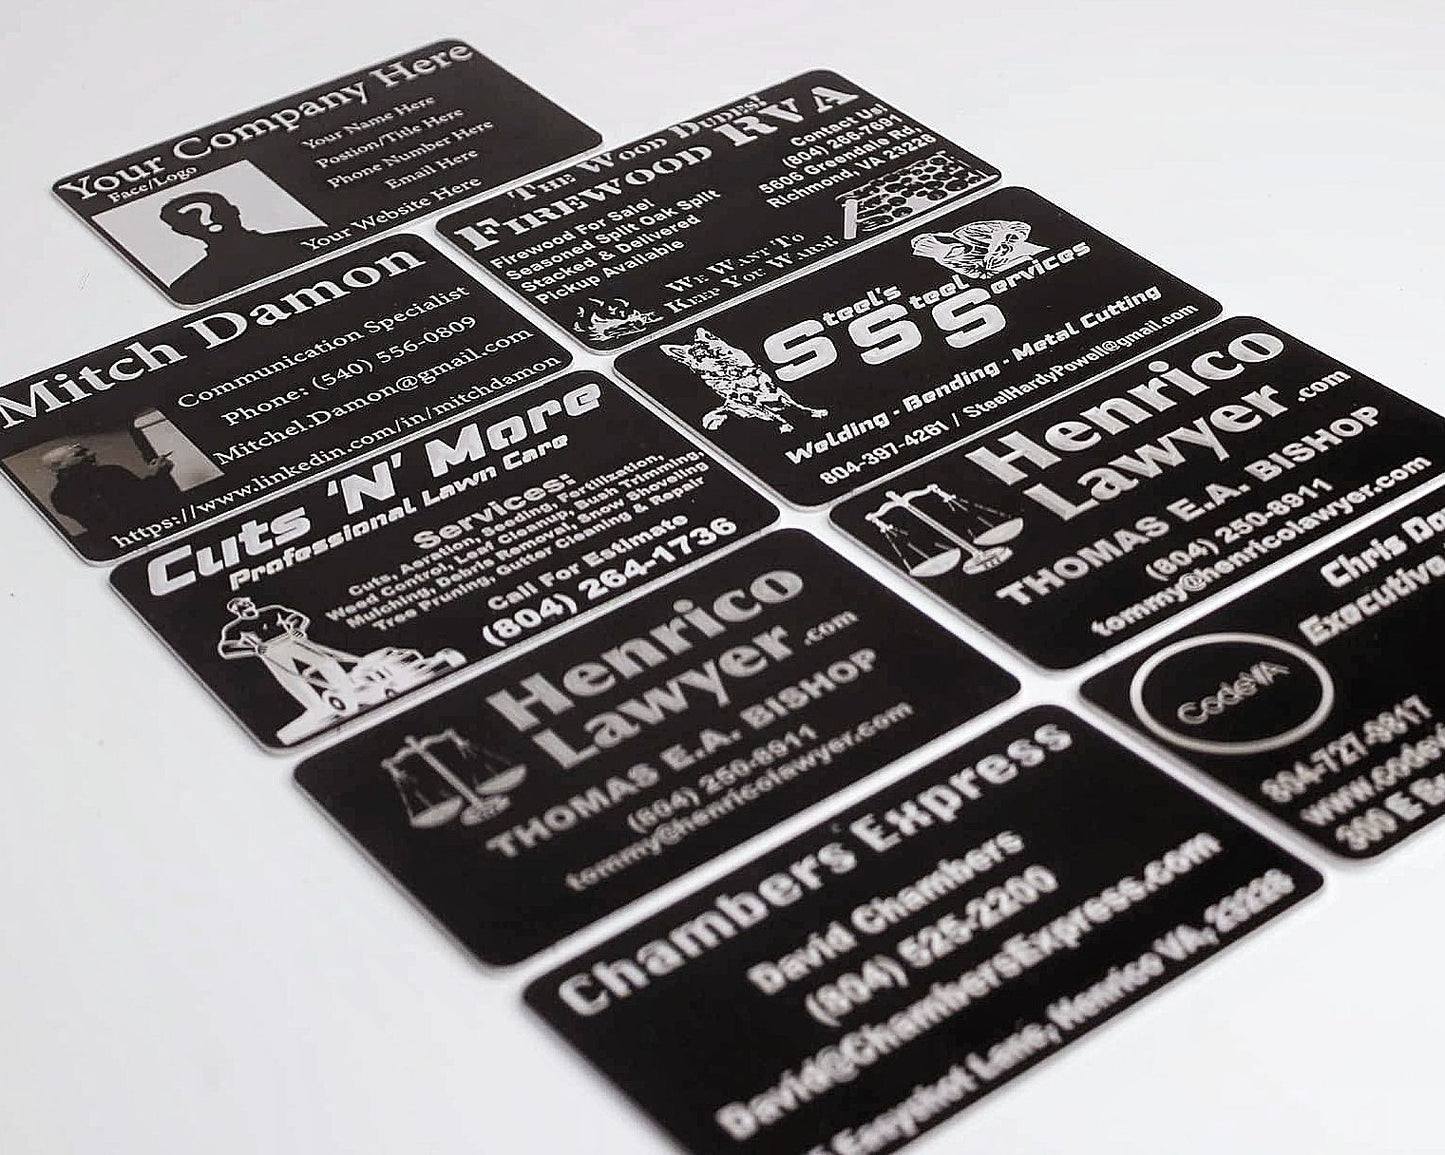 Laser Etched Black Anodized Aluminum Business Cards 25 Pack